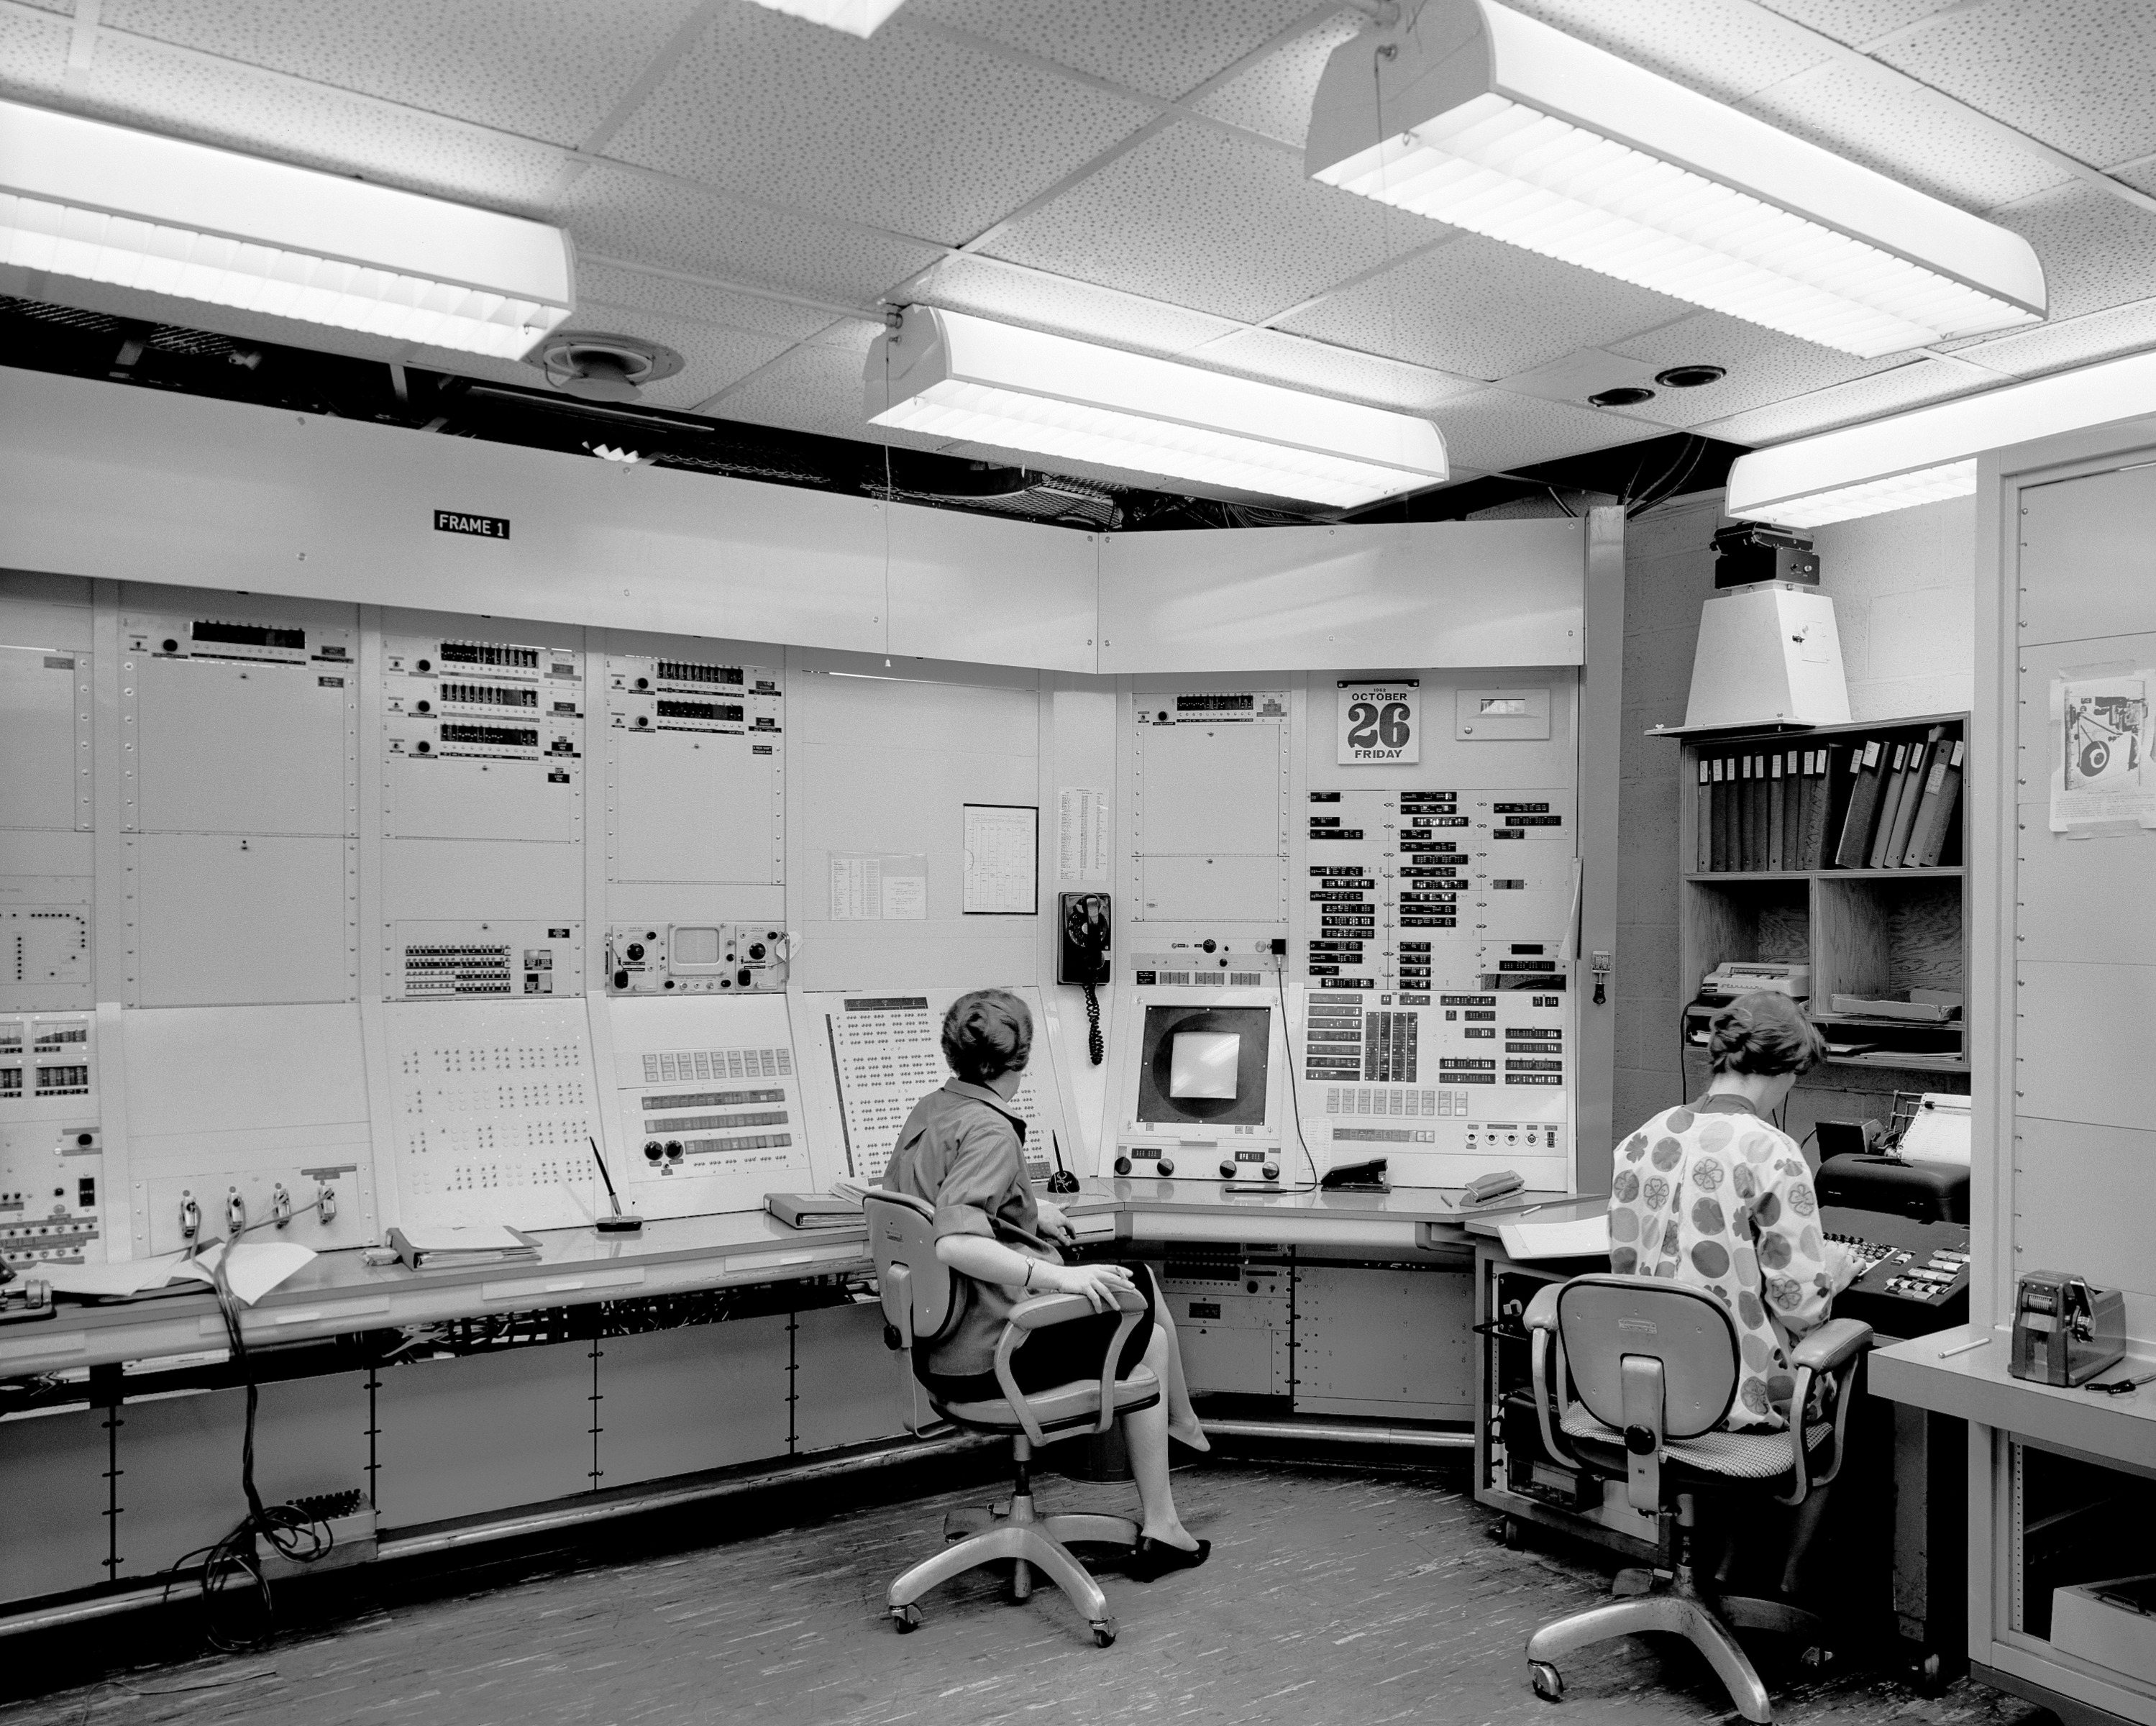 P91-206: 10/29/1962,  Two unidentified women working at the TX-2 Control Desk, console.